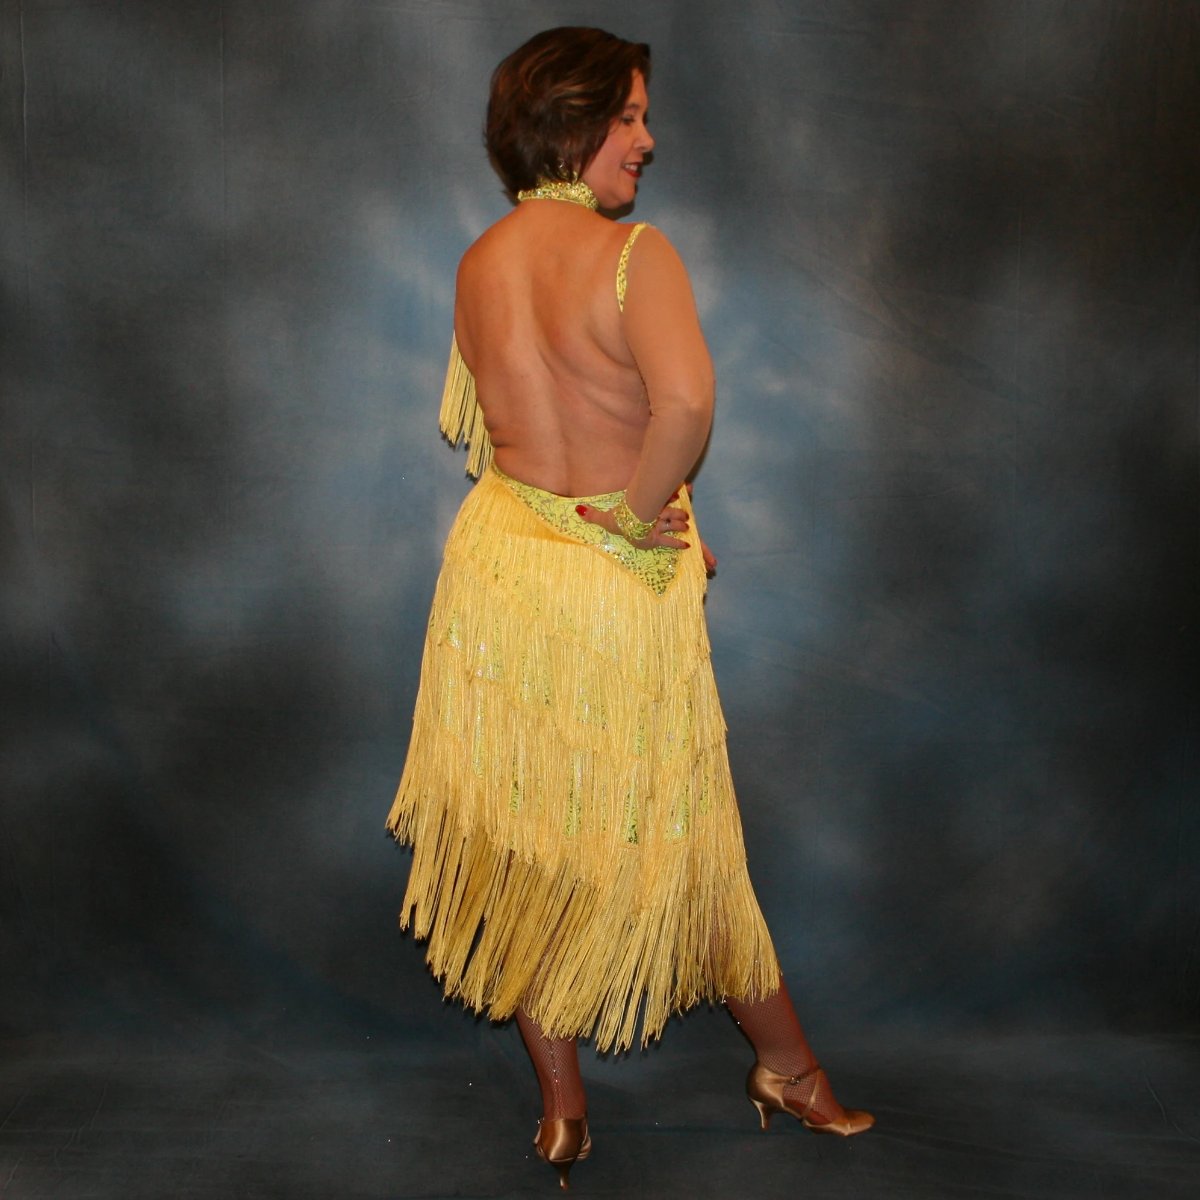 Crystal's Creations back view of Yellow Latin/rhythm fringe dress created in yellow splash metallic lycra with yards of chainette fringe, sheer nude illusion sleeves, embellished with jonquil Swarovski rhinestones.